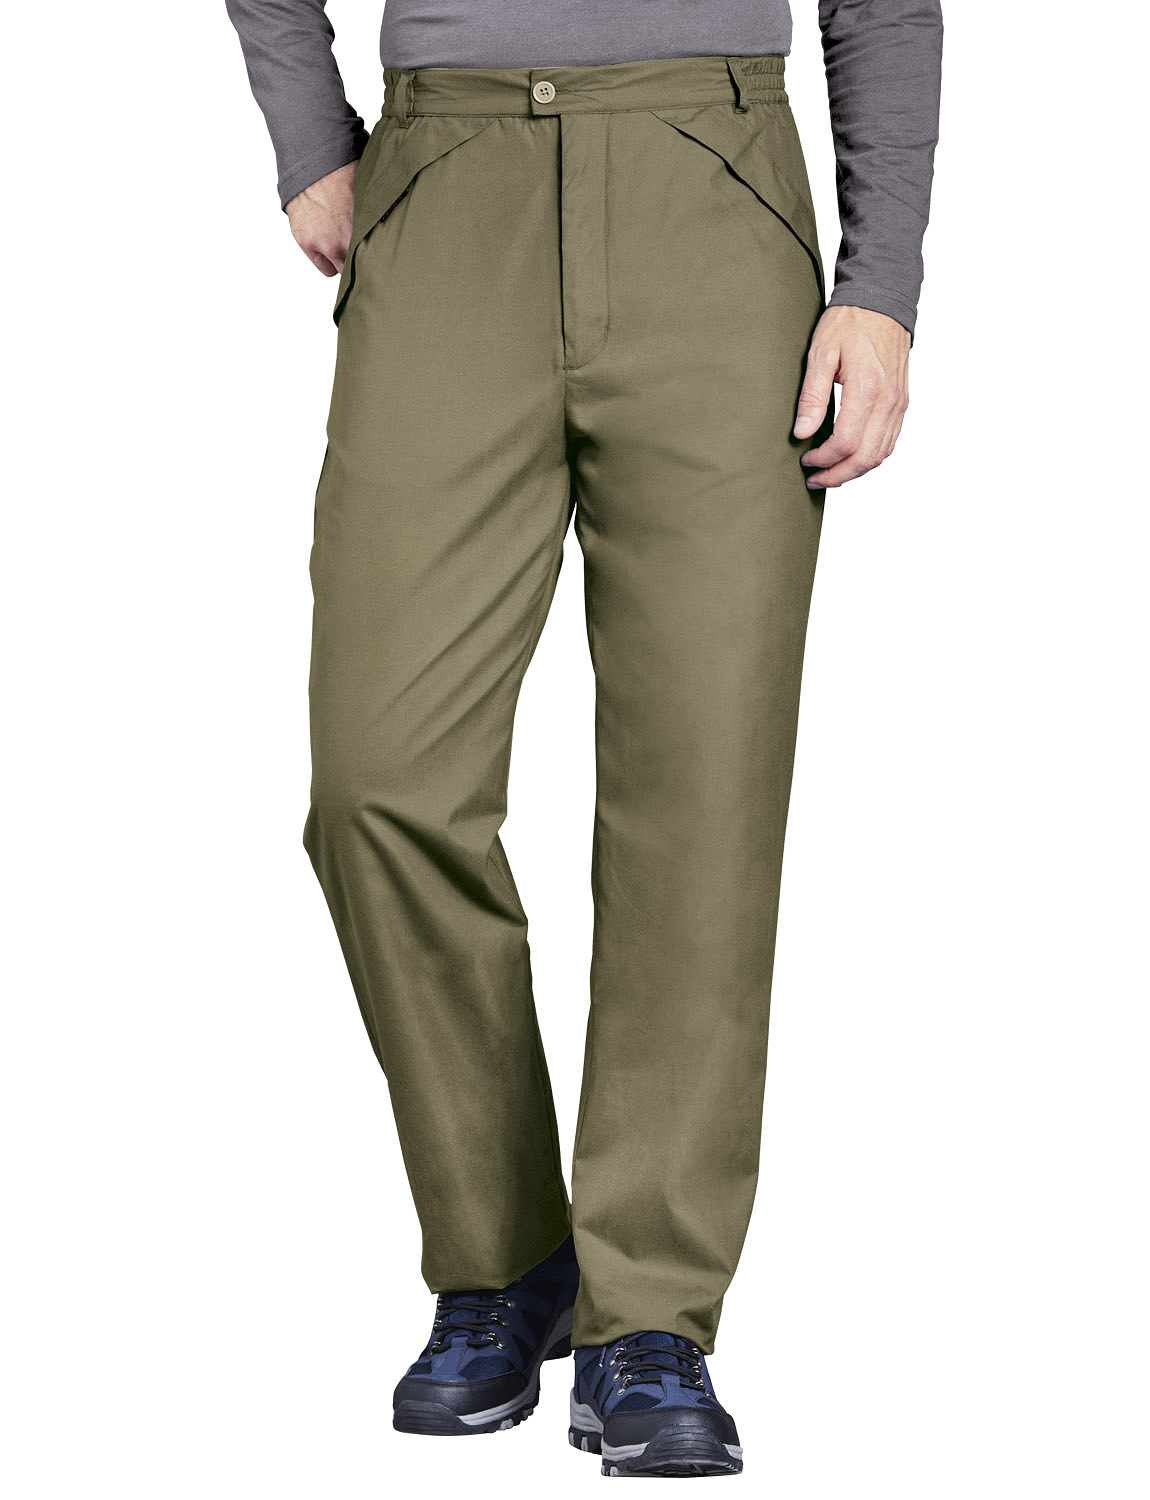 fleece-lined water-resistant trouser | warm comfortable and weather ...